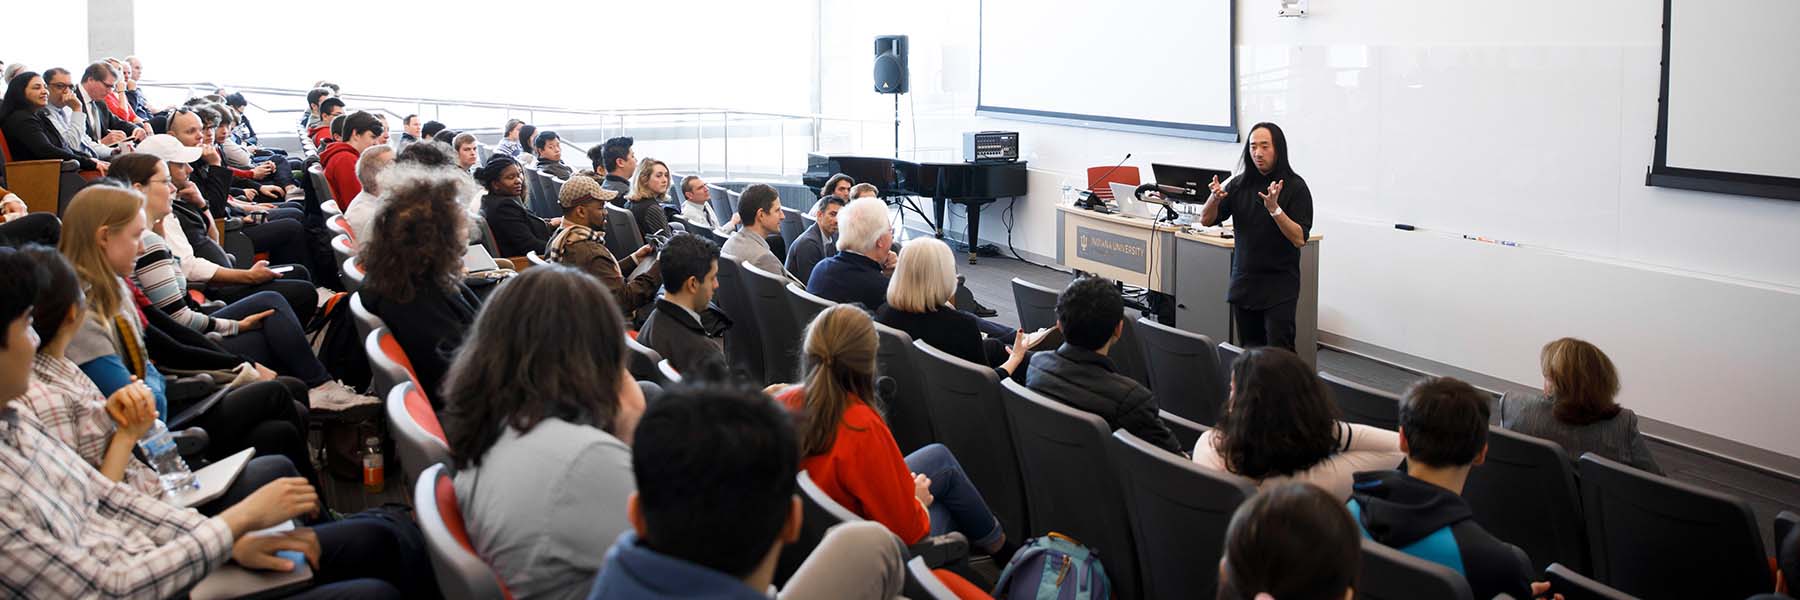 Students and professionals sit and listen to a speaker in a large lecture hall.